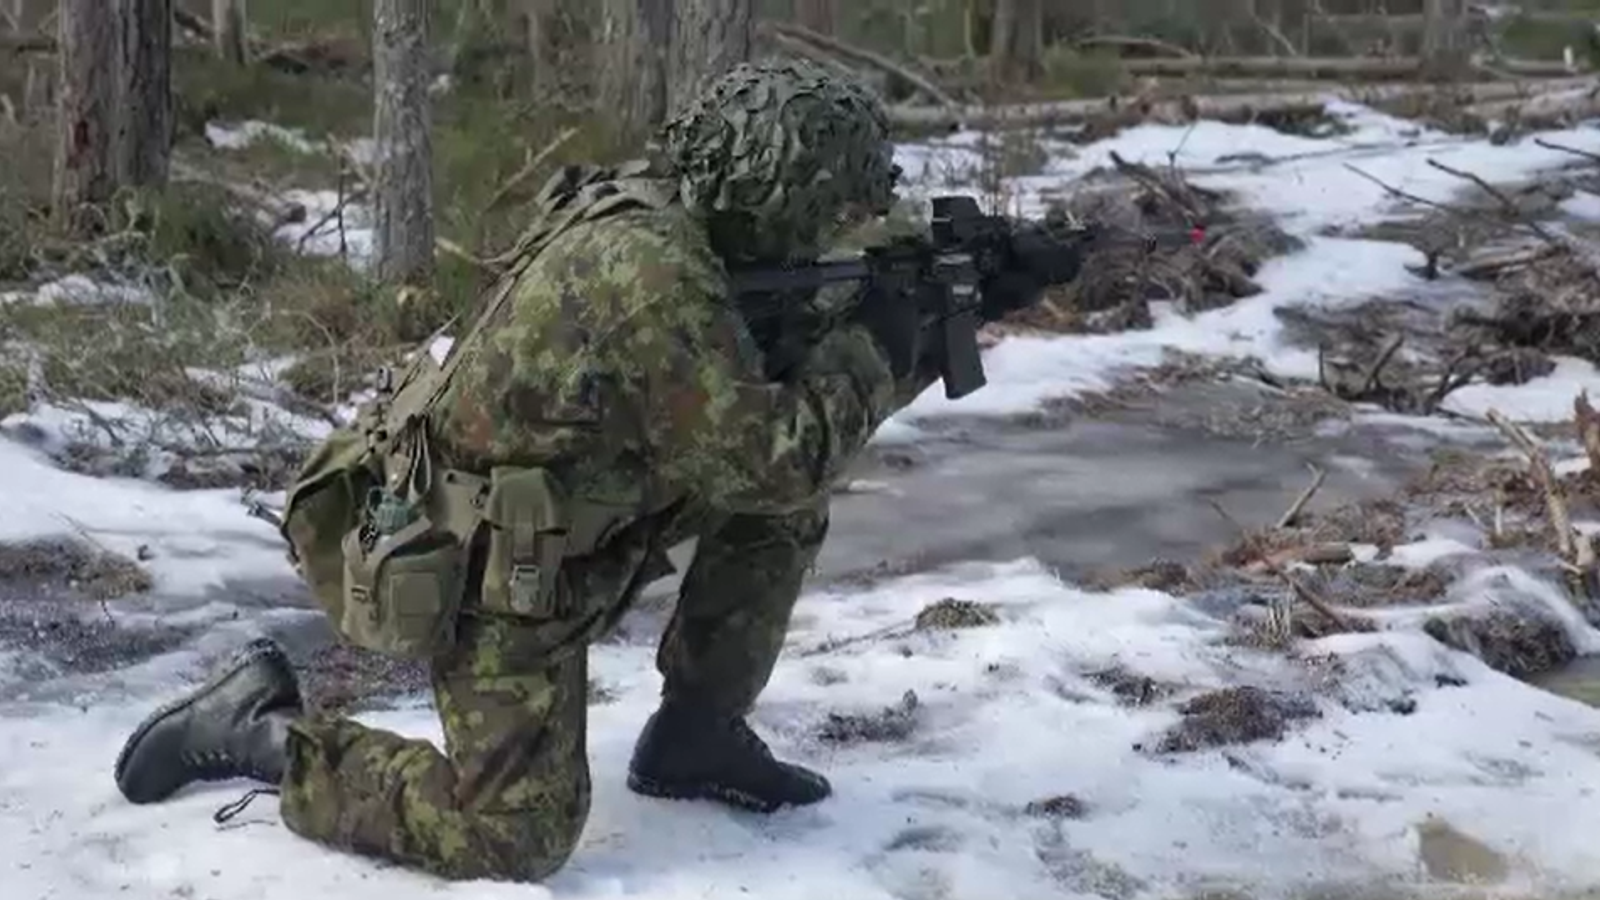 how to, estonia's weekend warriors: the 'sas' civilians urging brits to learn how to fight